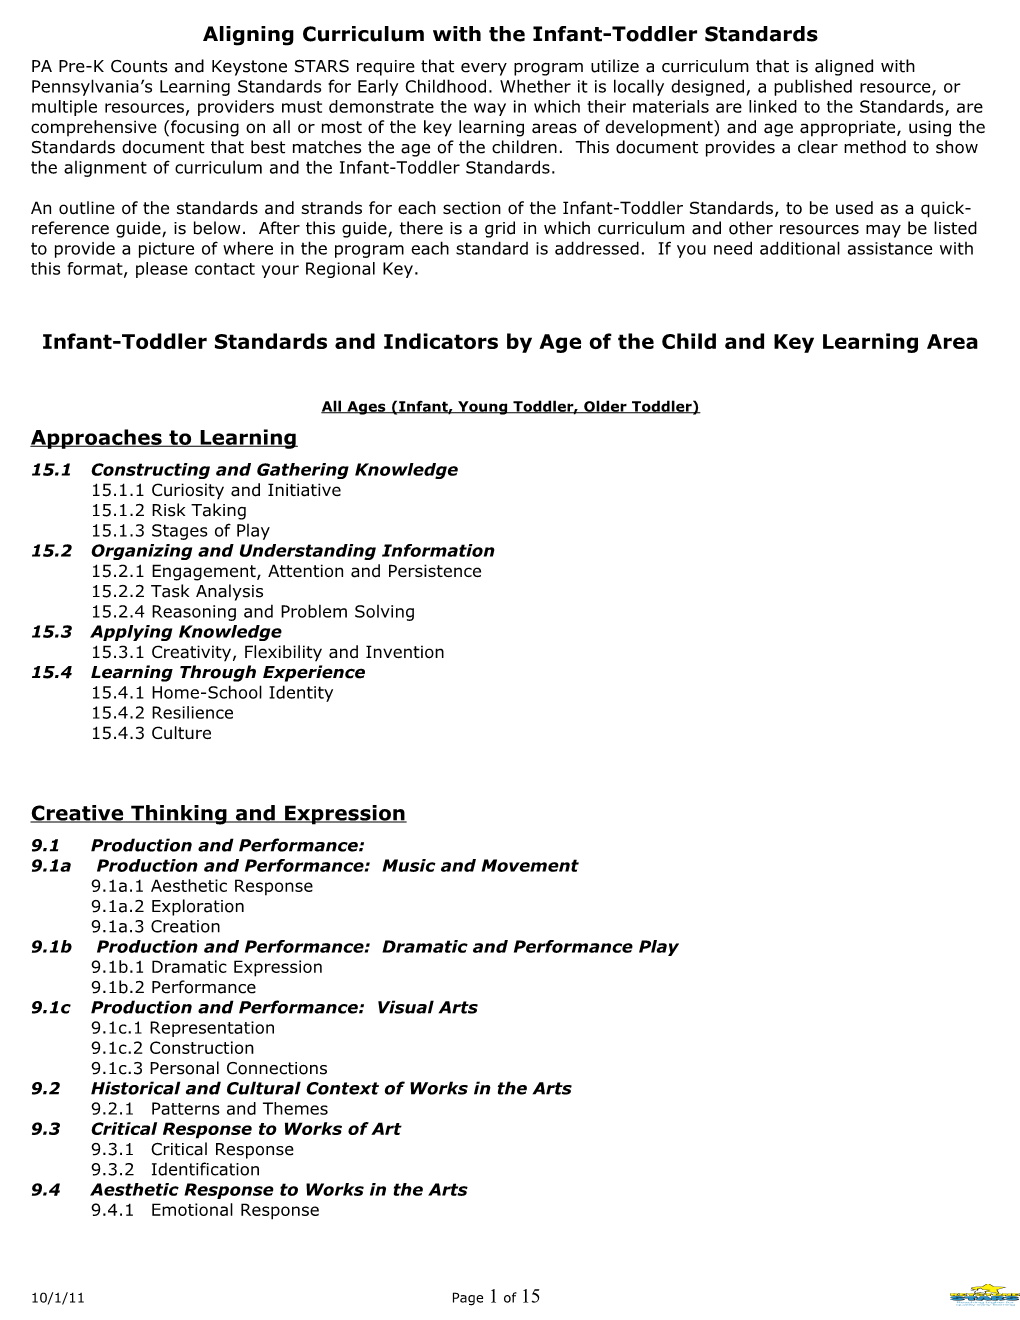 Aligning Curriculum With The Infant-Toddler Standards